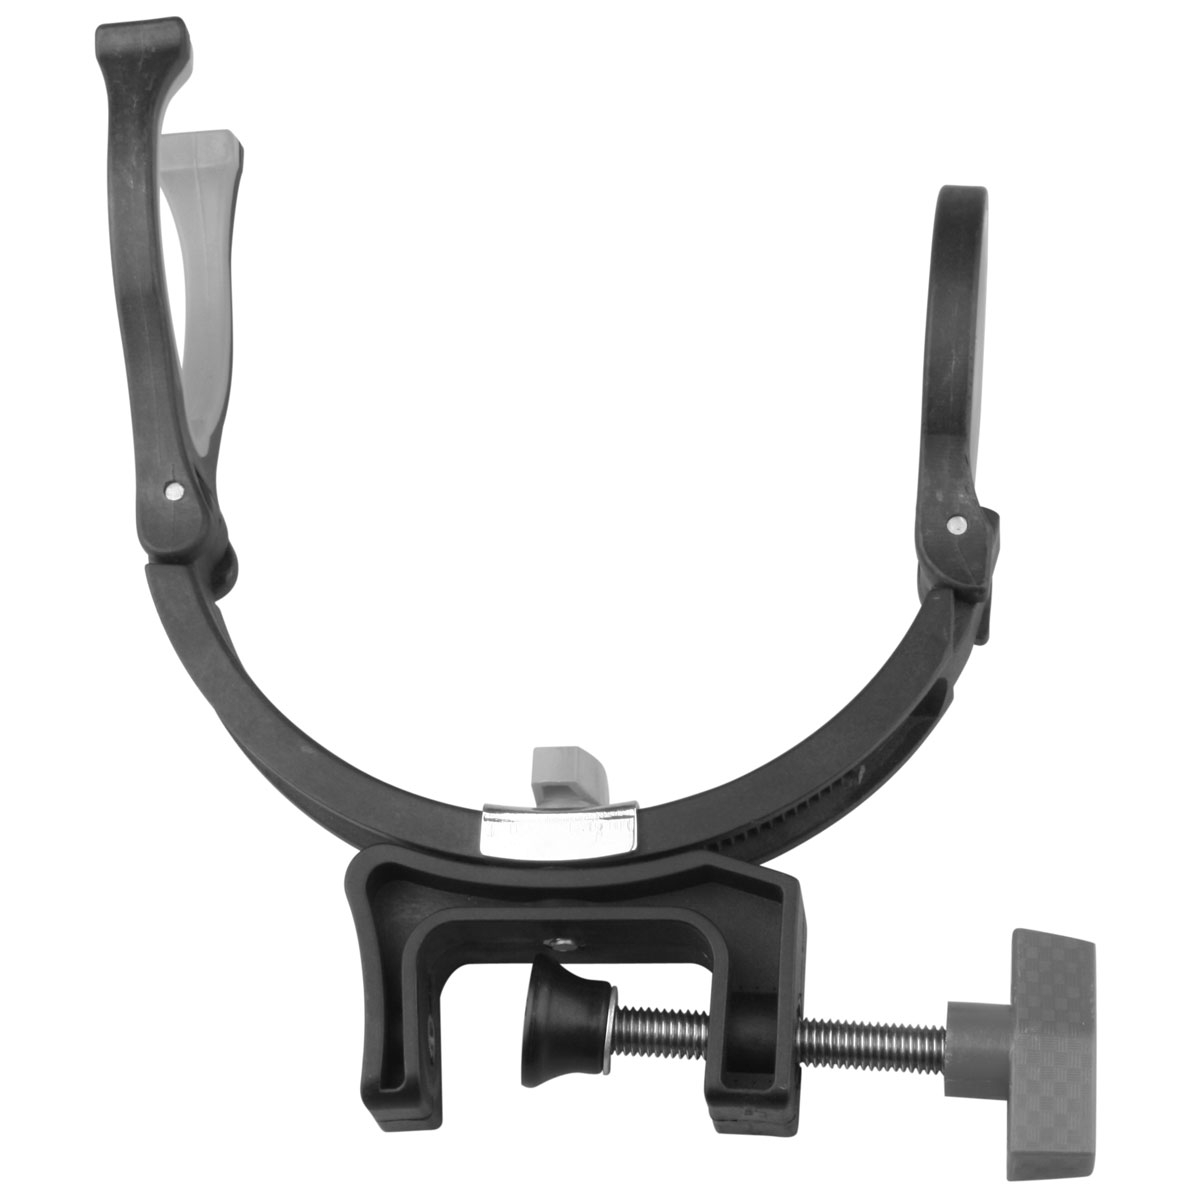 Sea Fishing Boat Rod Holders & Accessories - Angling Active